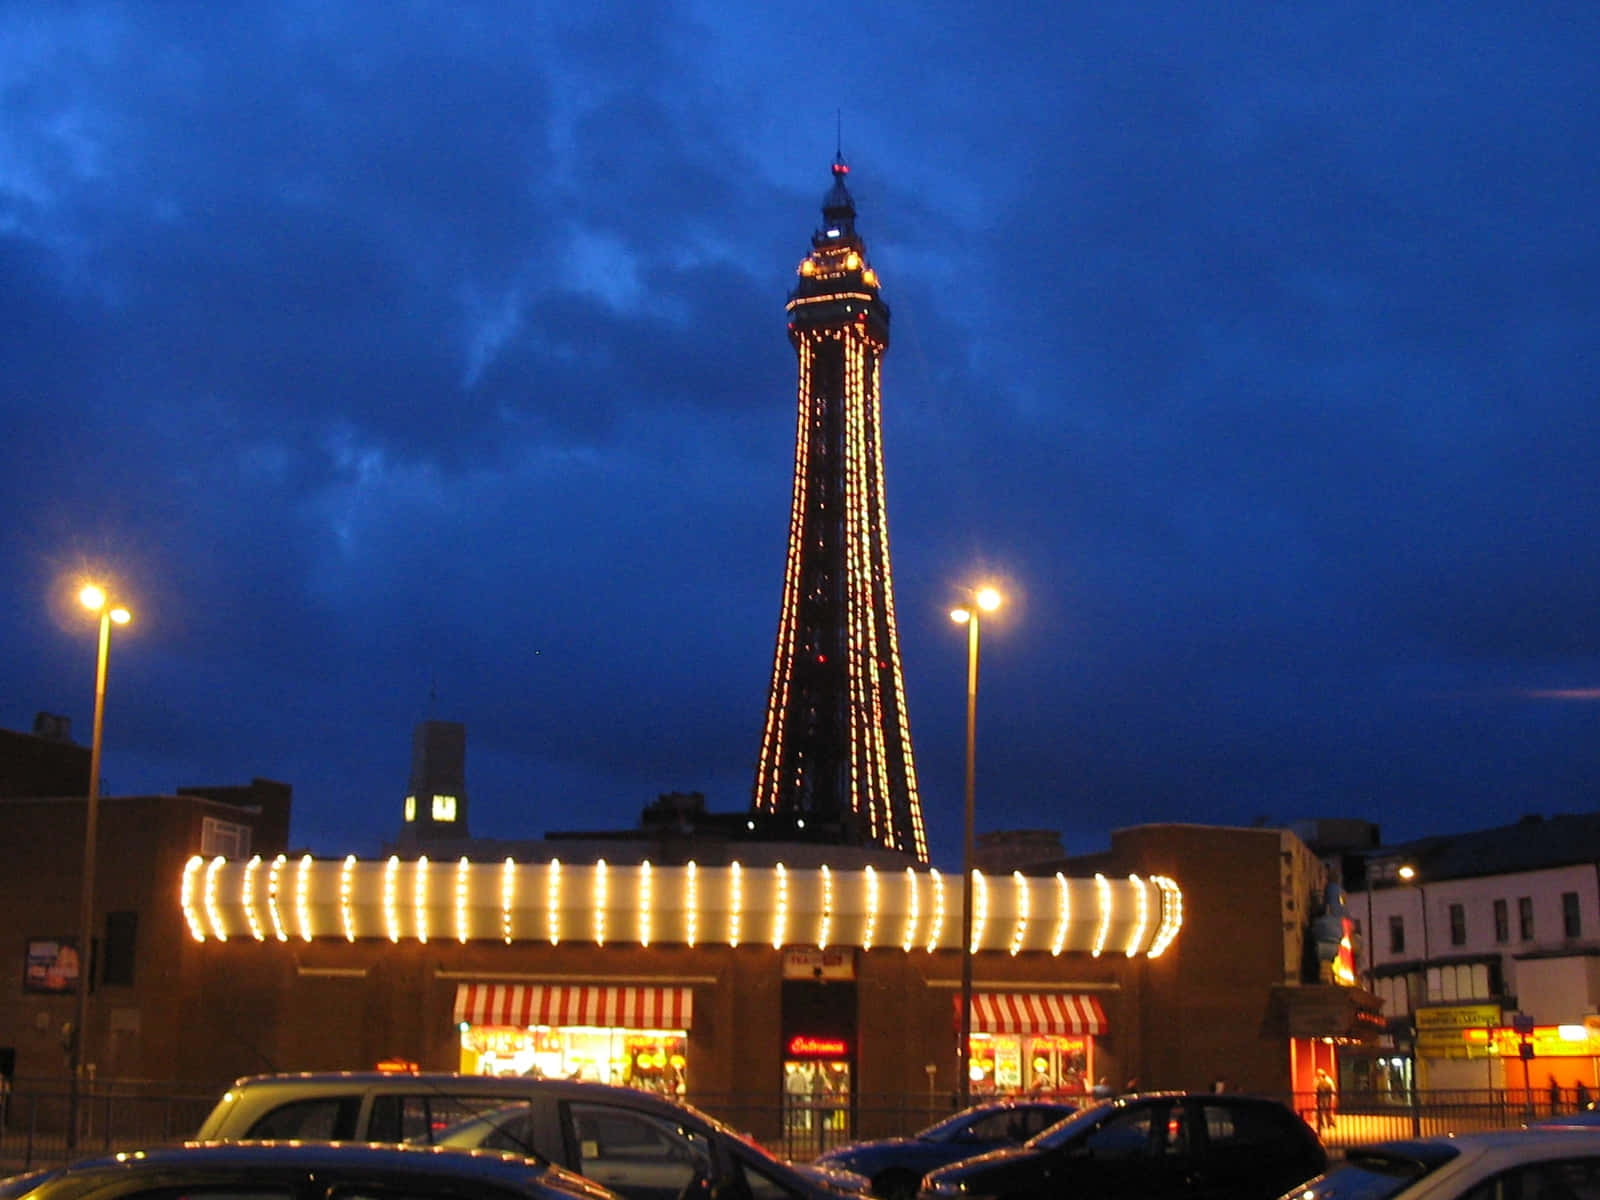 Blackpool Tower Beneath The Cloudy Blue Night Sky Wallpaper